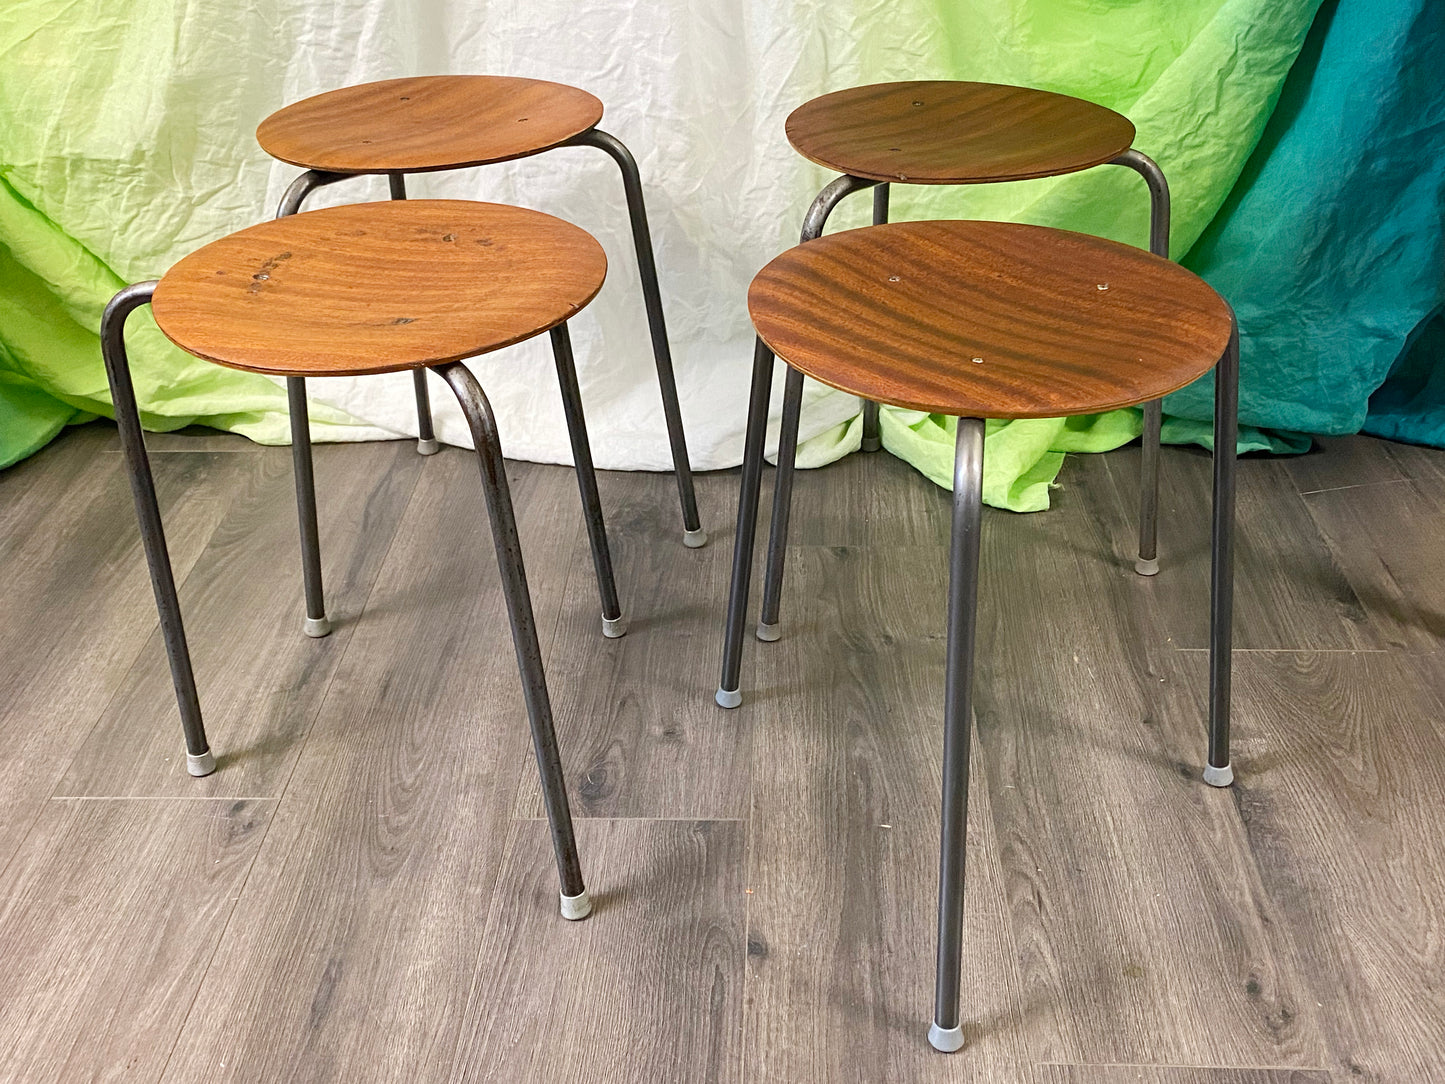 Set of 4 Early Tripod Dot Stools designed by Arne Jacobson - Denmark 1960s